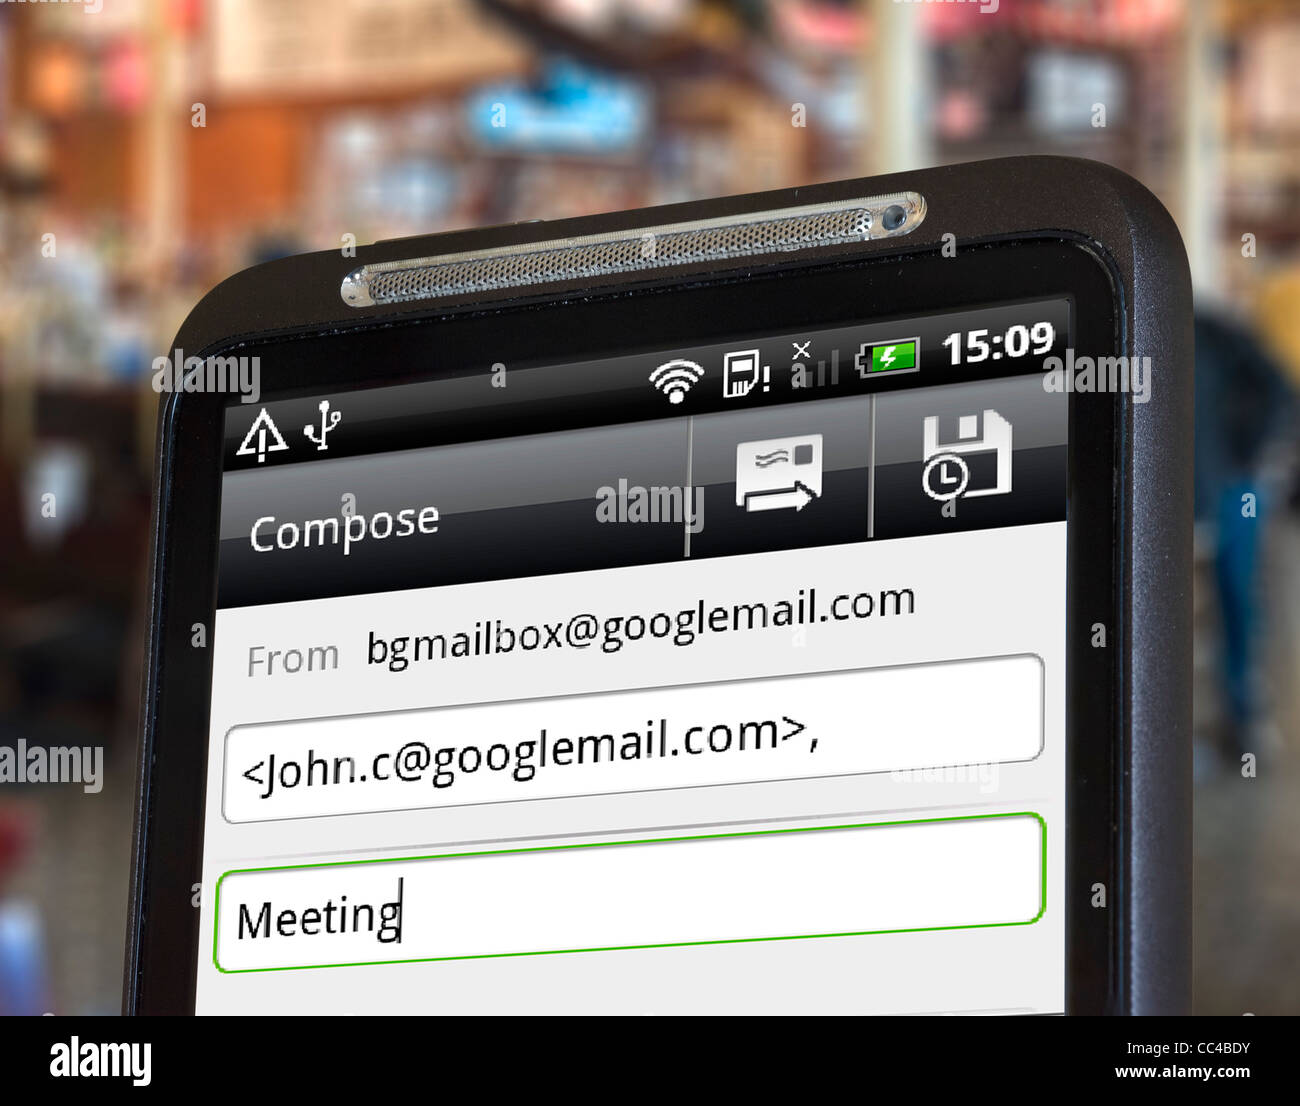 Composing a Gmail email on an HTC smartphone Stock Photo